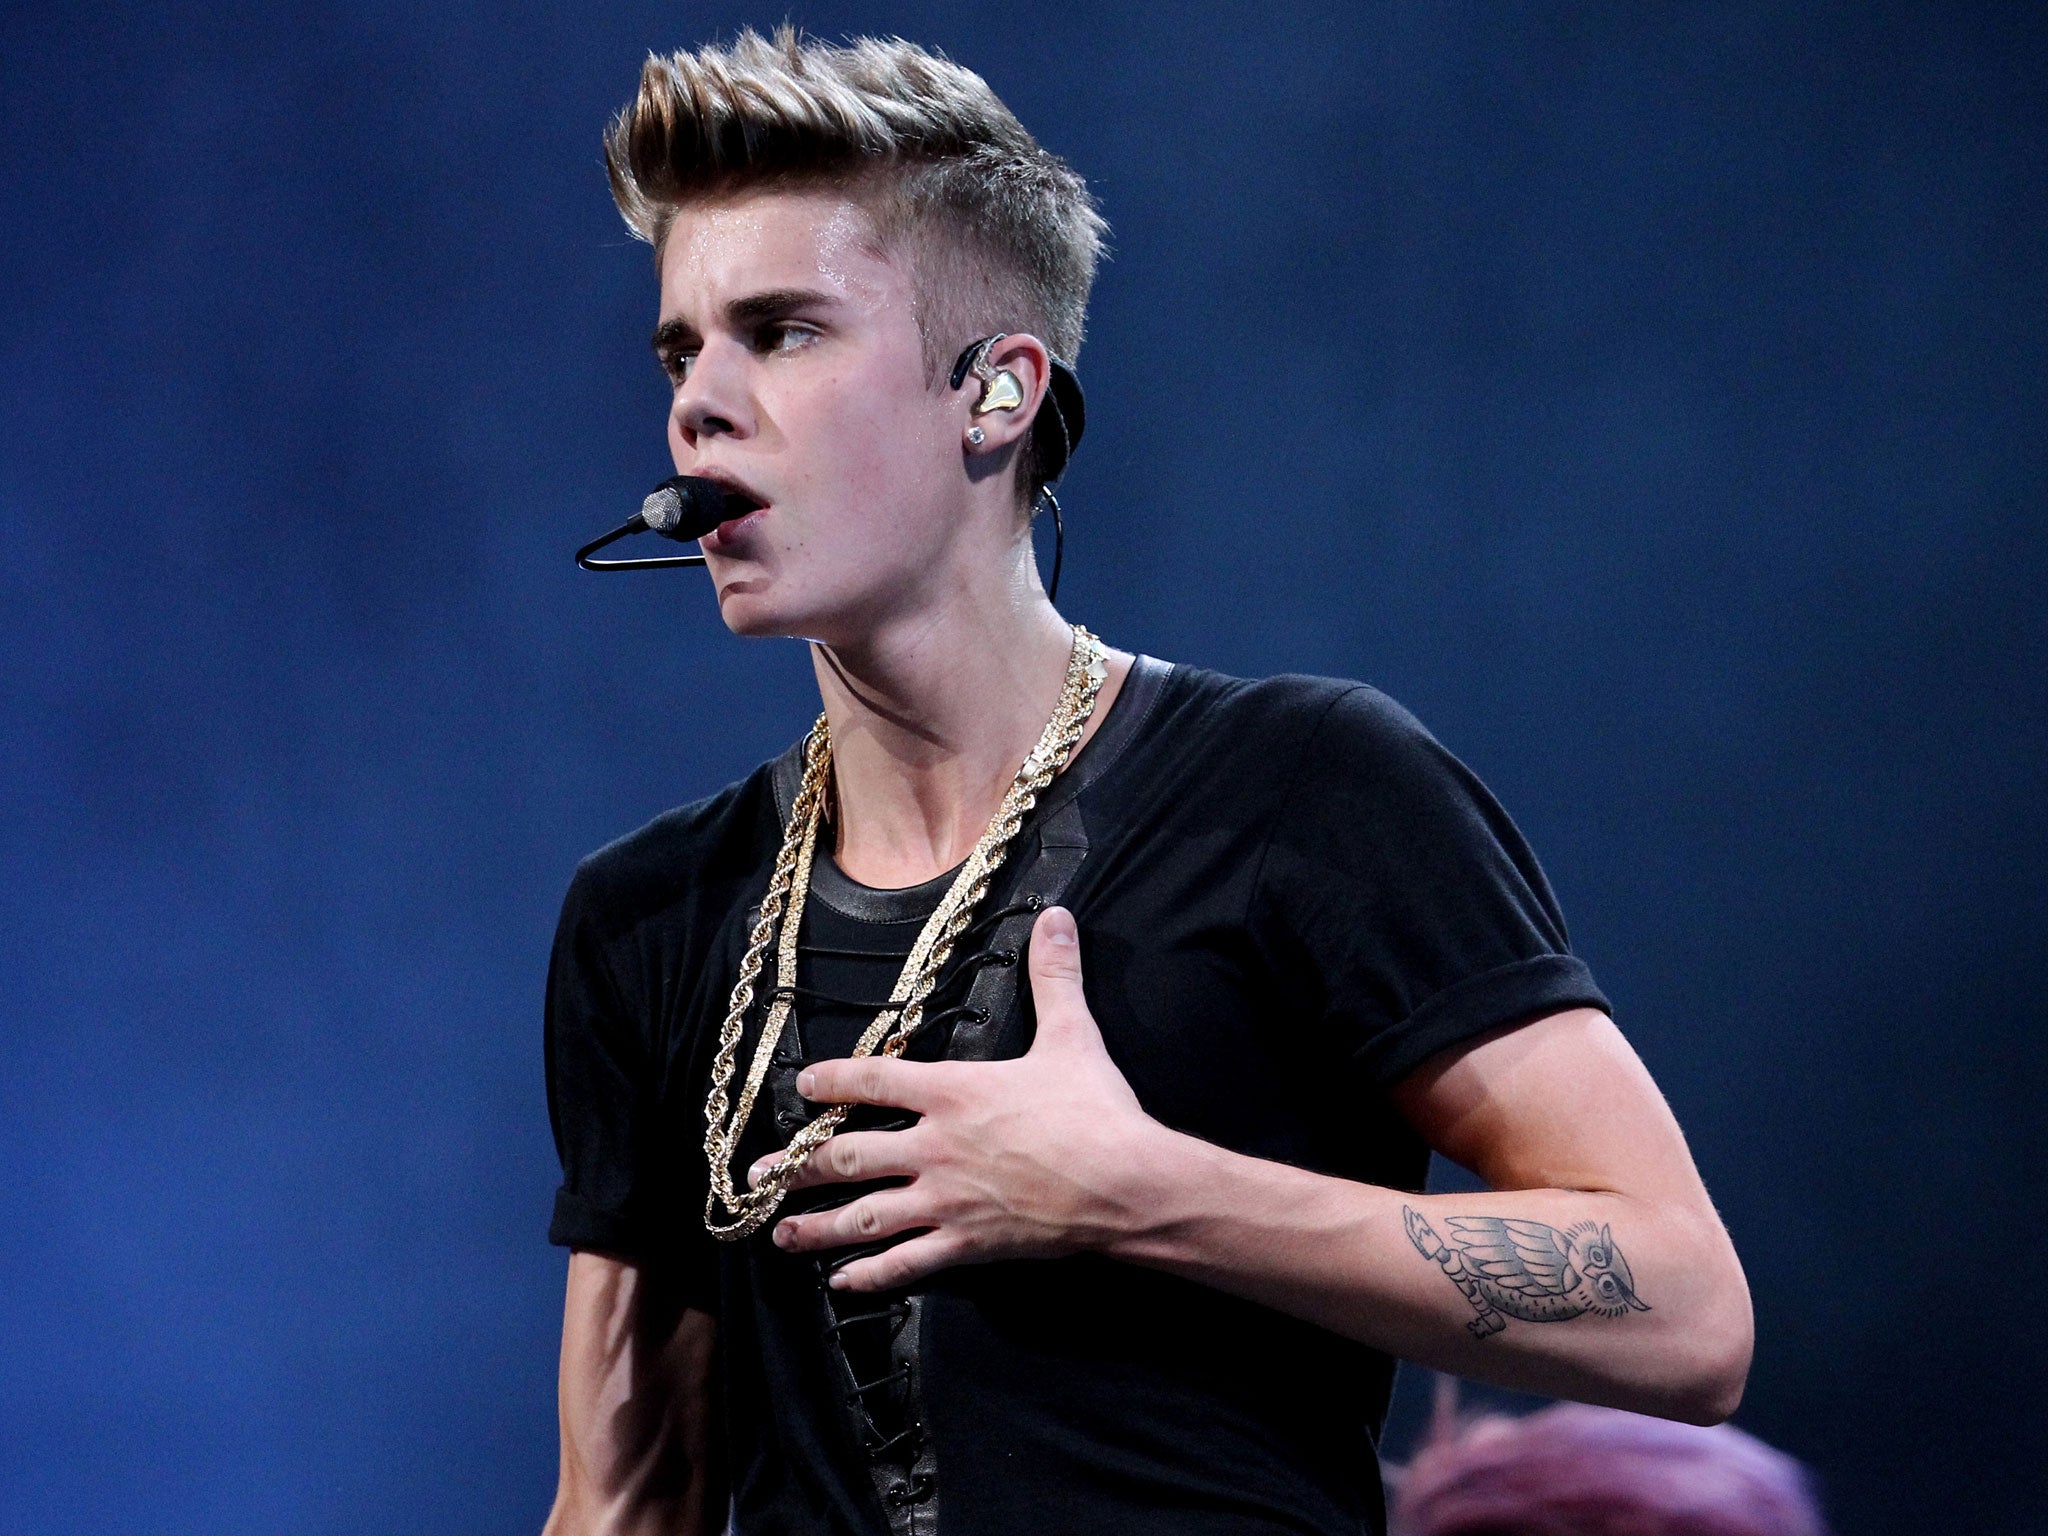 Justin Bieber shows off one of his tattoos onstage during KISS FM's 2012 Jingle Ball